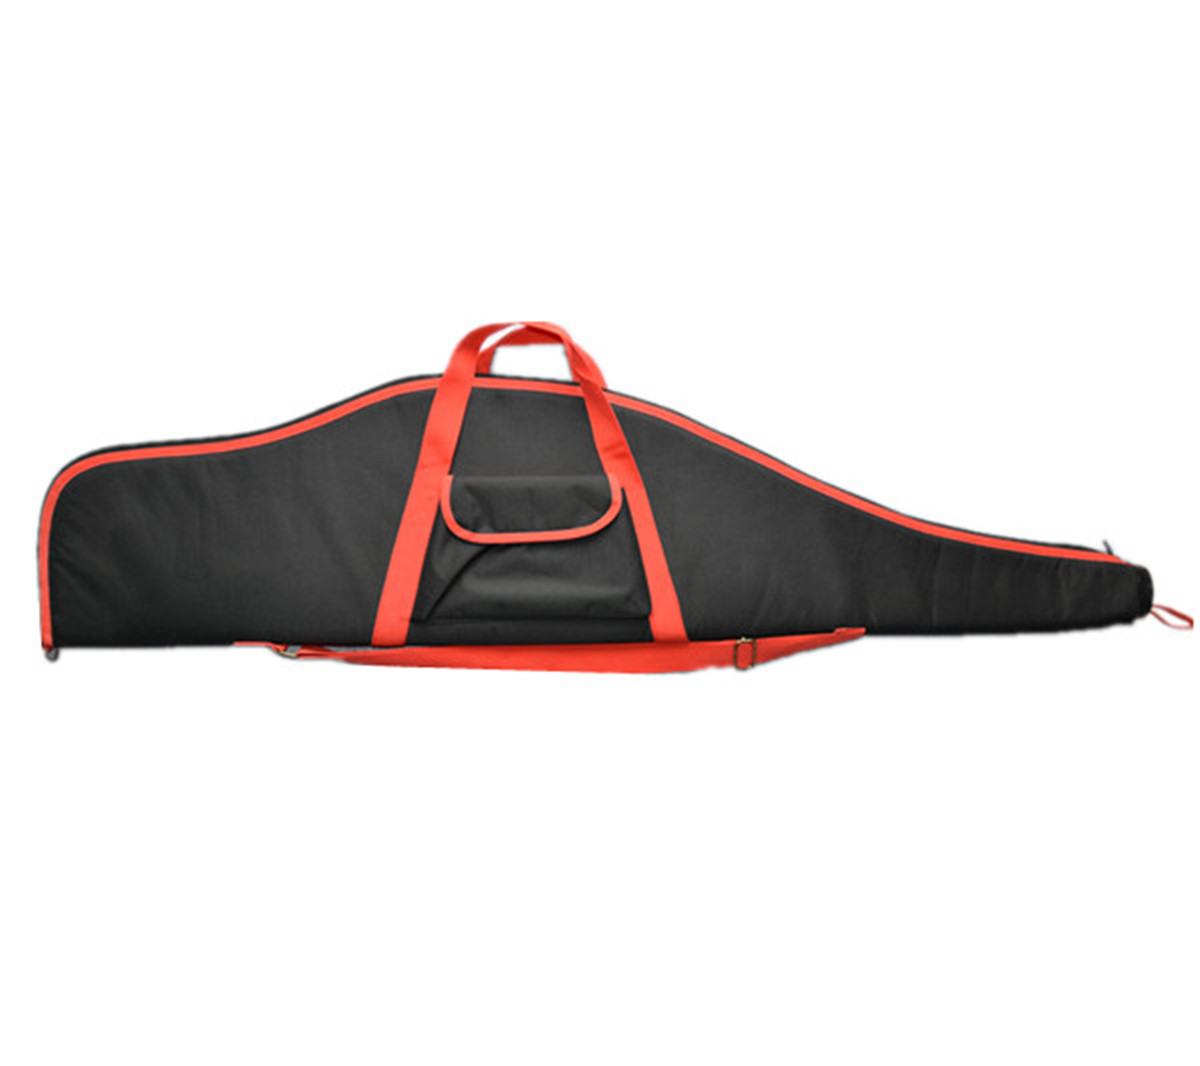 Hunting waterproof black & red color rifle Cases Featured Image